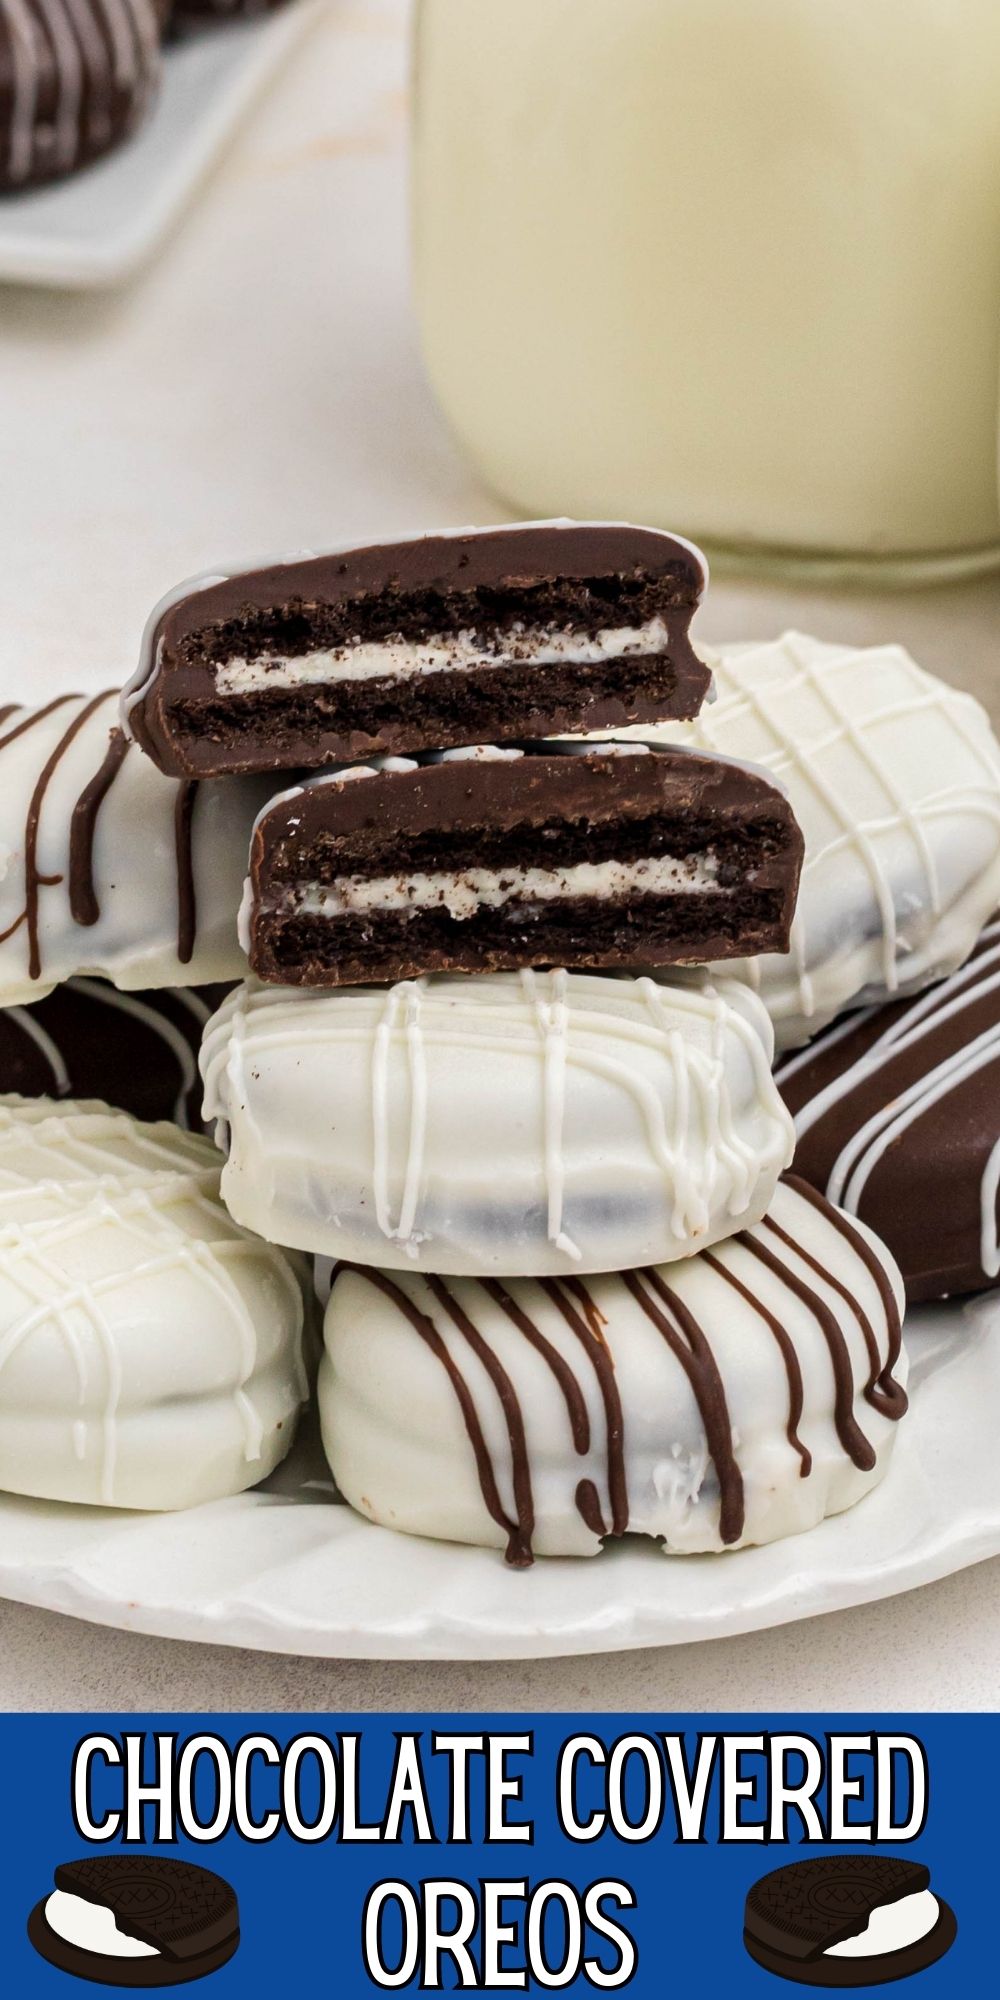 Making Chocolate Covered Oreos is a fun and easy activity to do with friends or family. All you need are Oreos and melting chocolates!